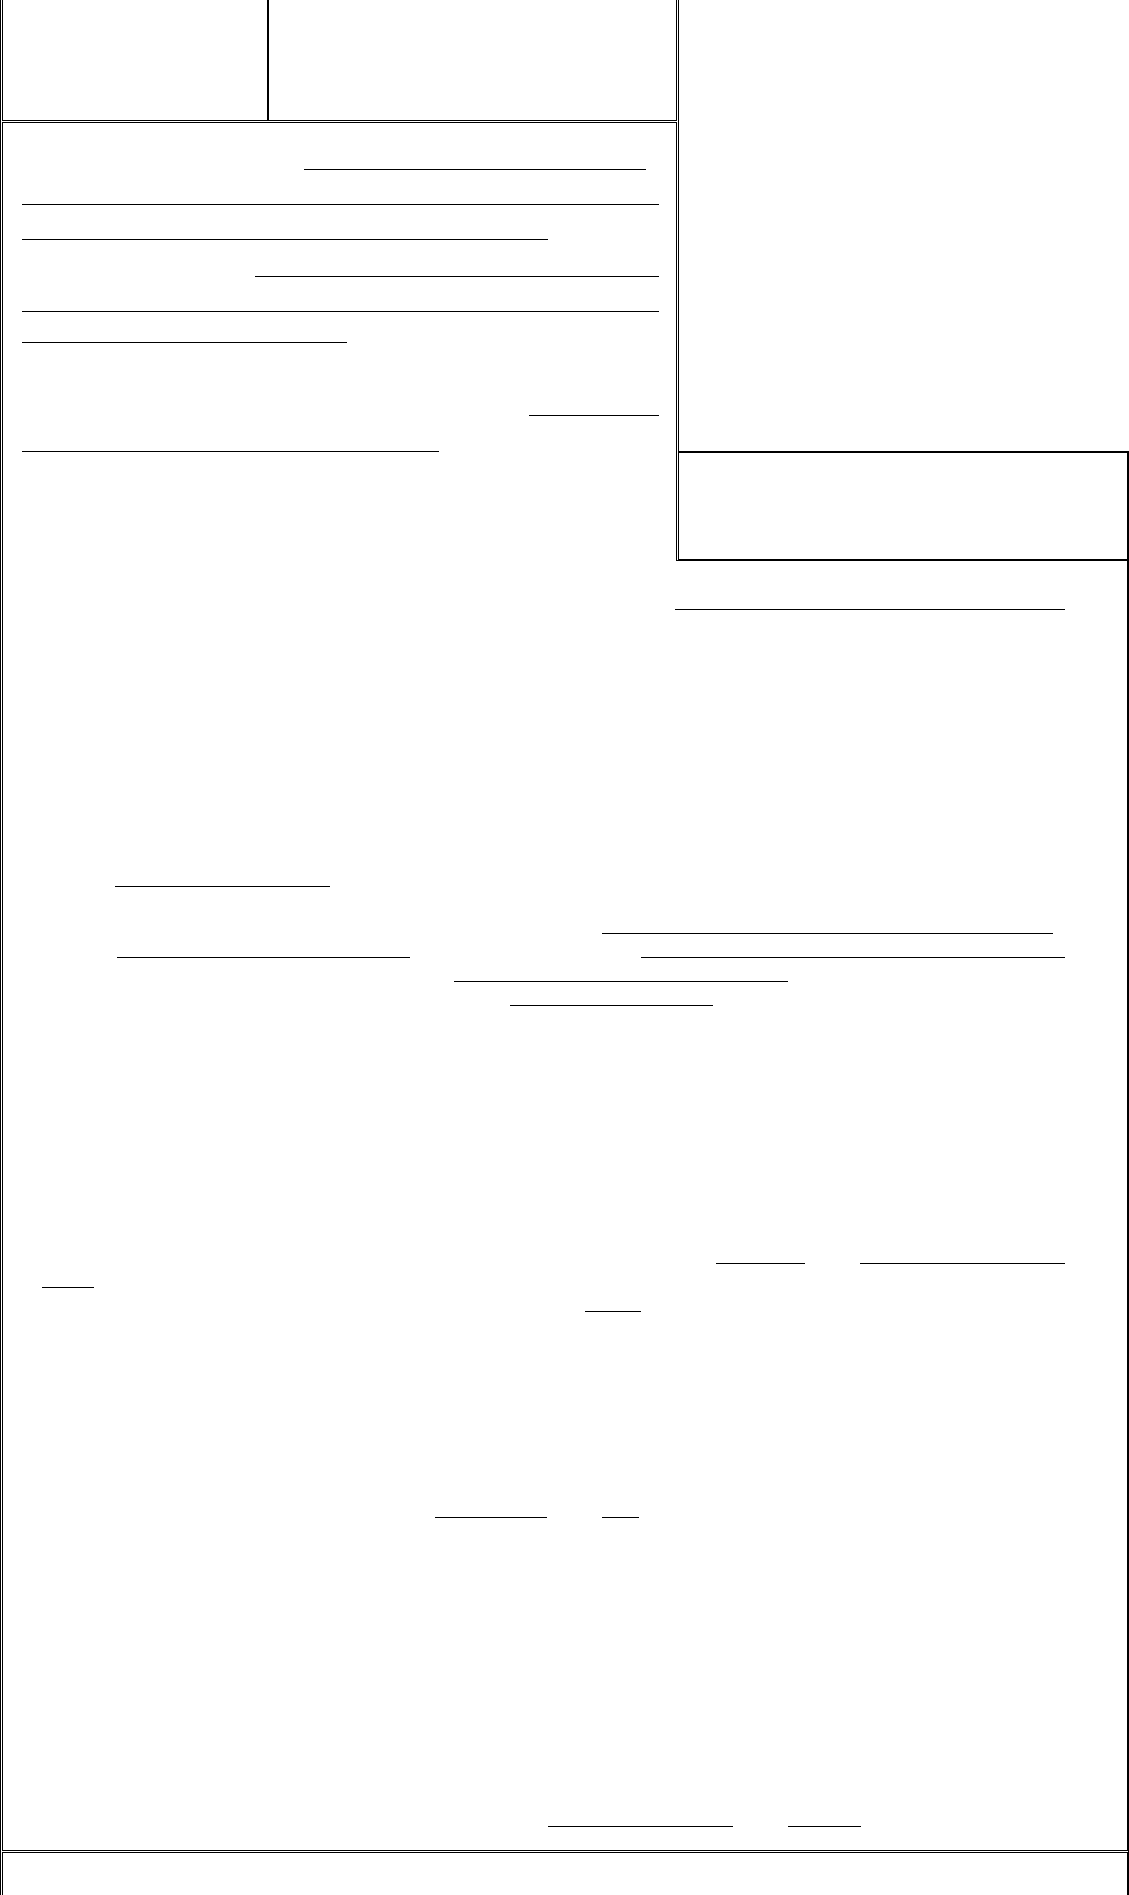 Land Contract Template 3